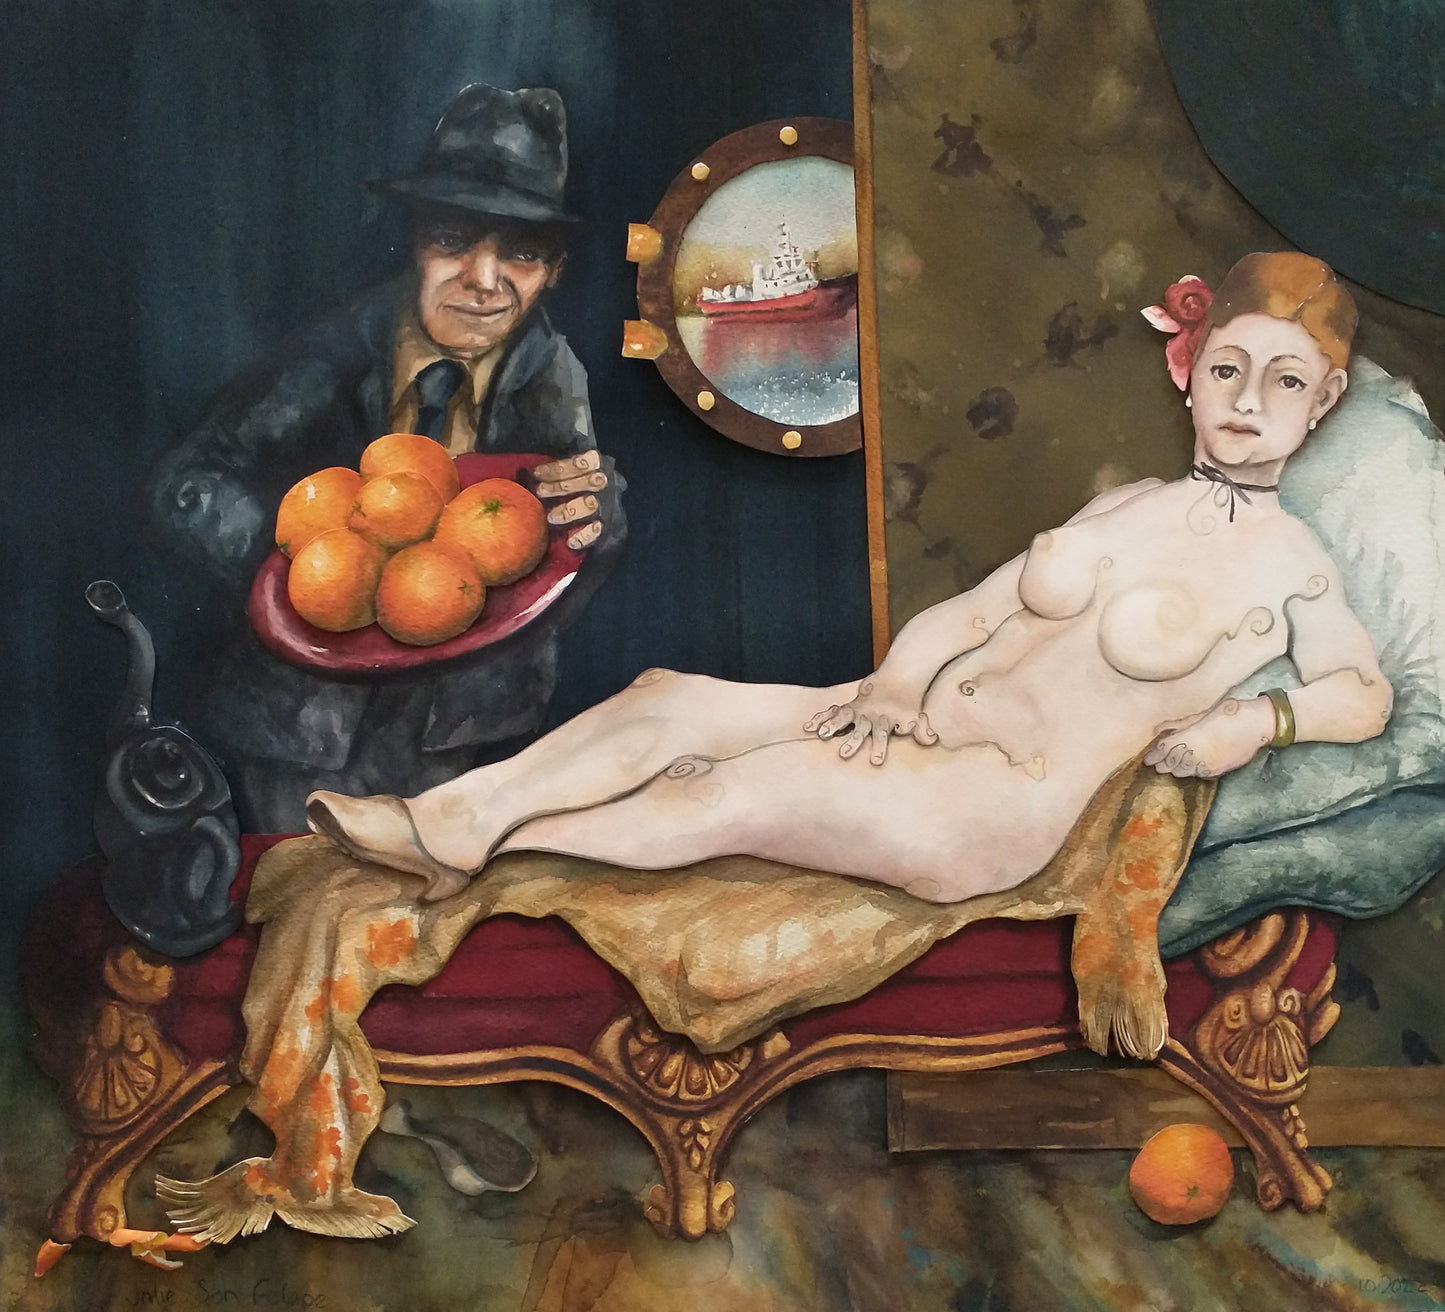 Suzanne as Olympia (after Leonard Cohen and Édouard Manet)